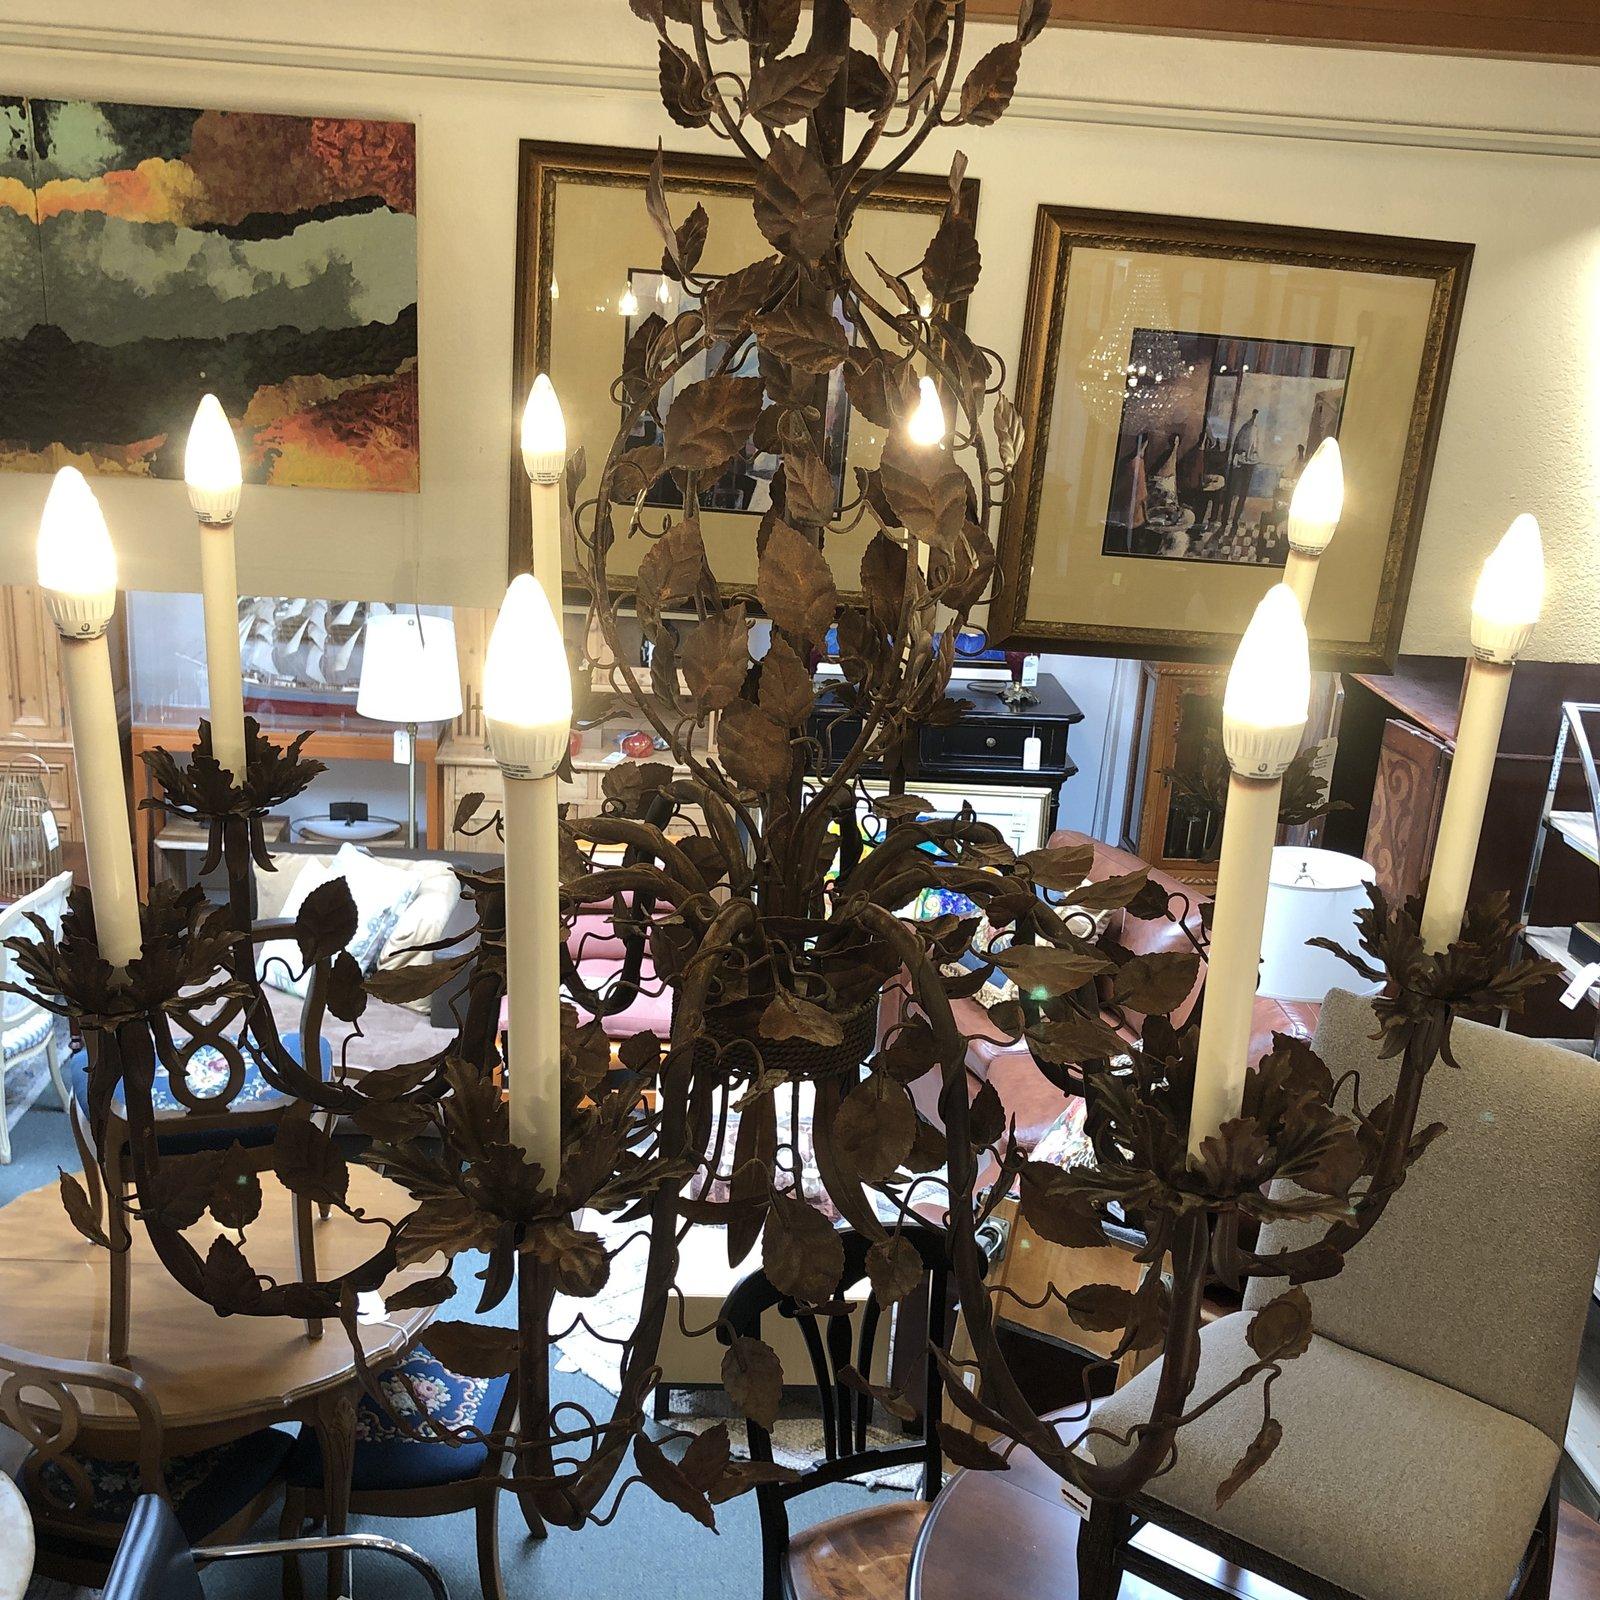 A Richard Taylor design style chandelier. Handcrafted from metal by skilled artisans, consist of eight lights. Inspired by the horticultural practices of training perennials plants by clipping the foliage and twigs of shrubs. Each leaf is hand